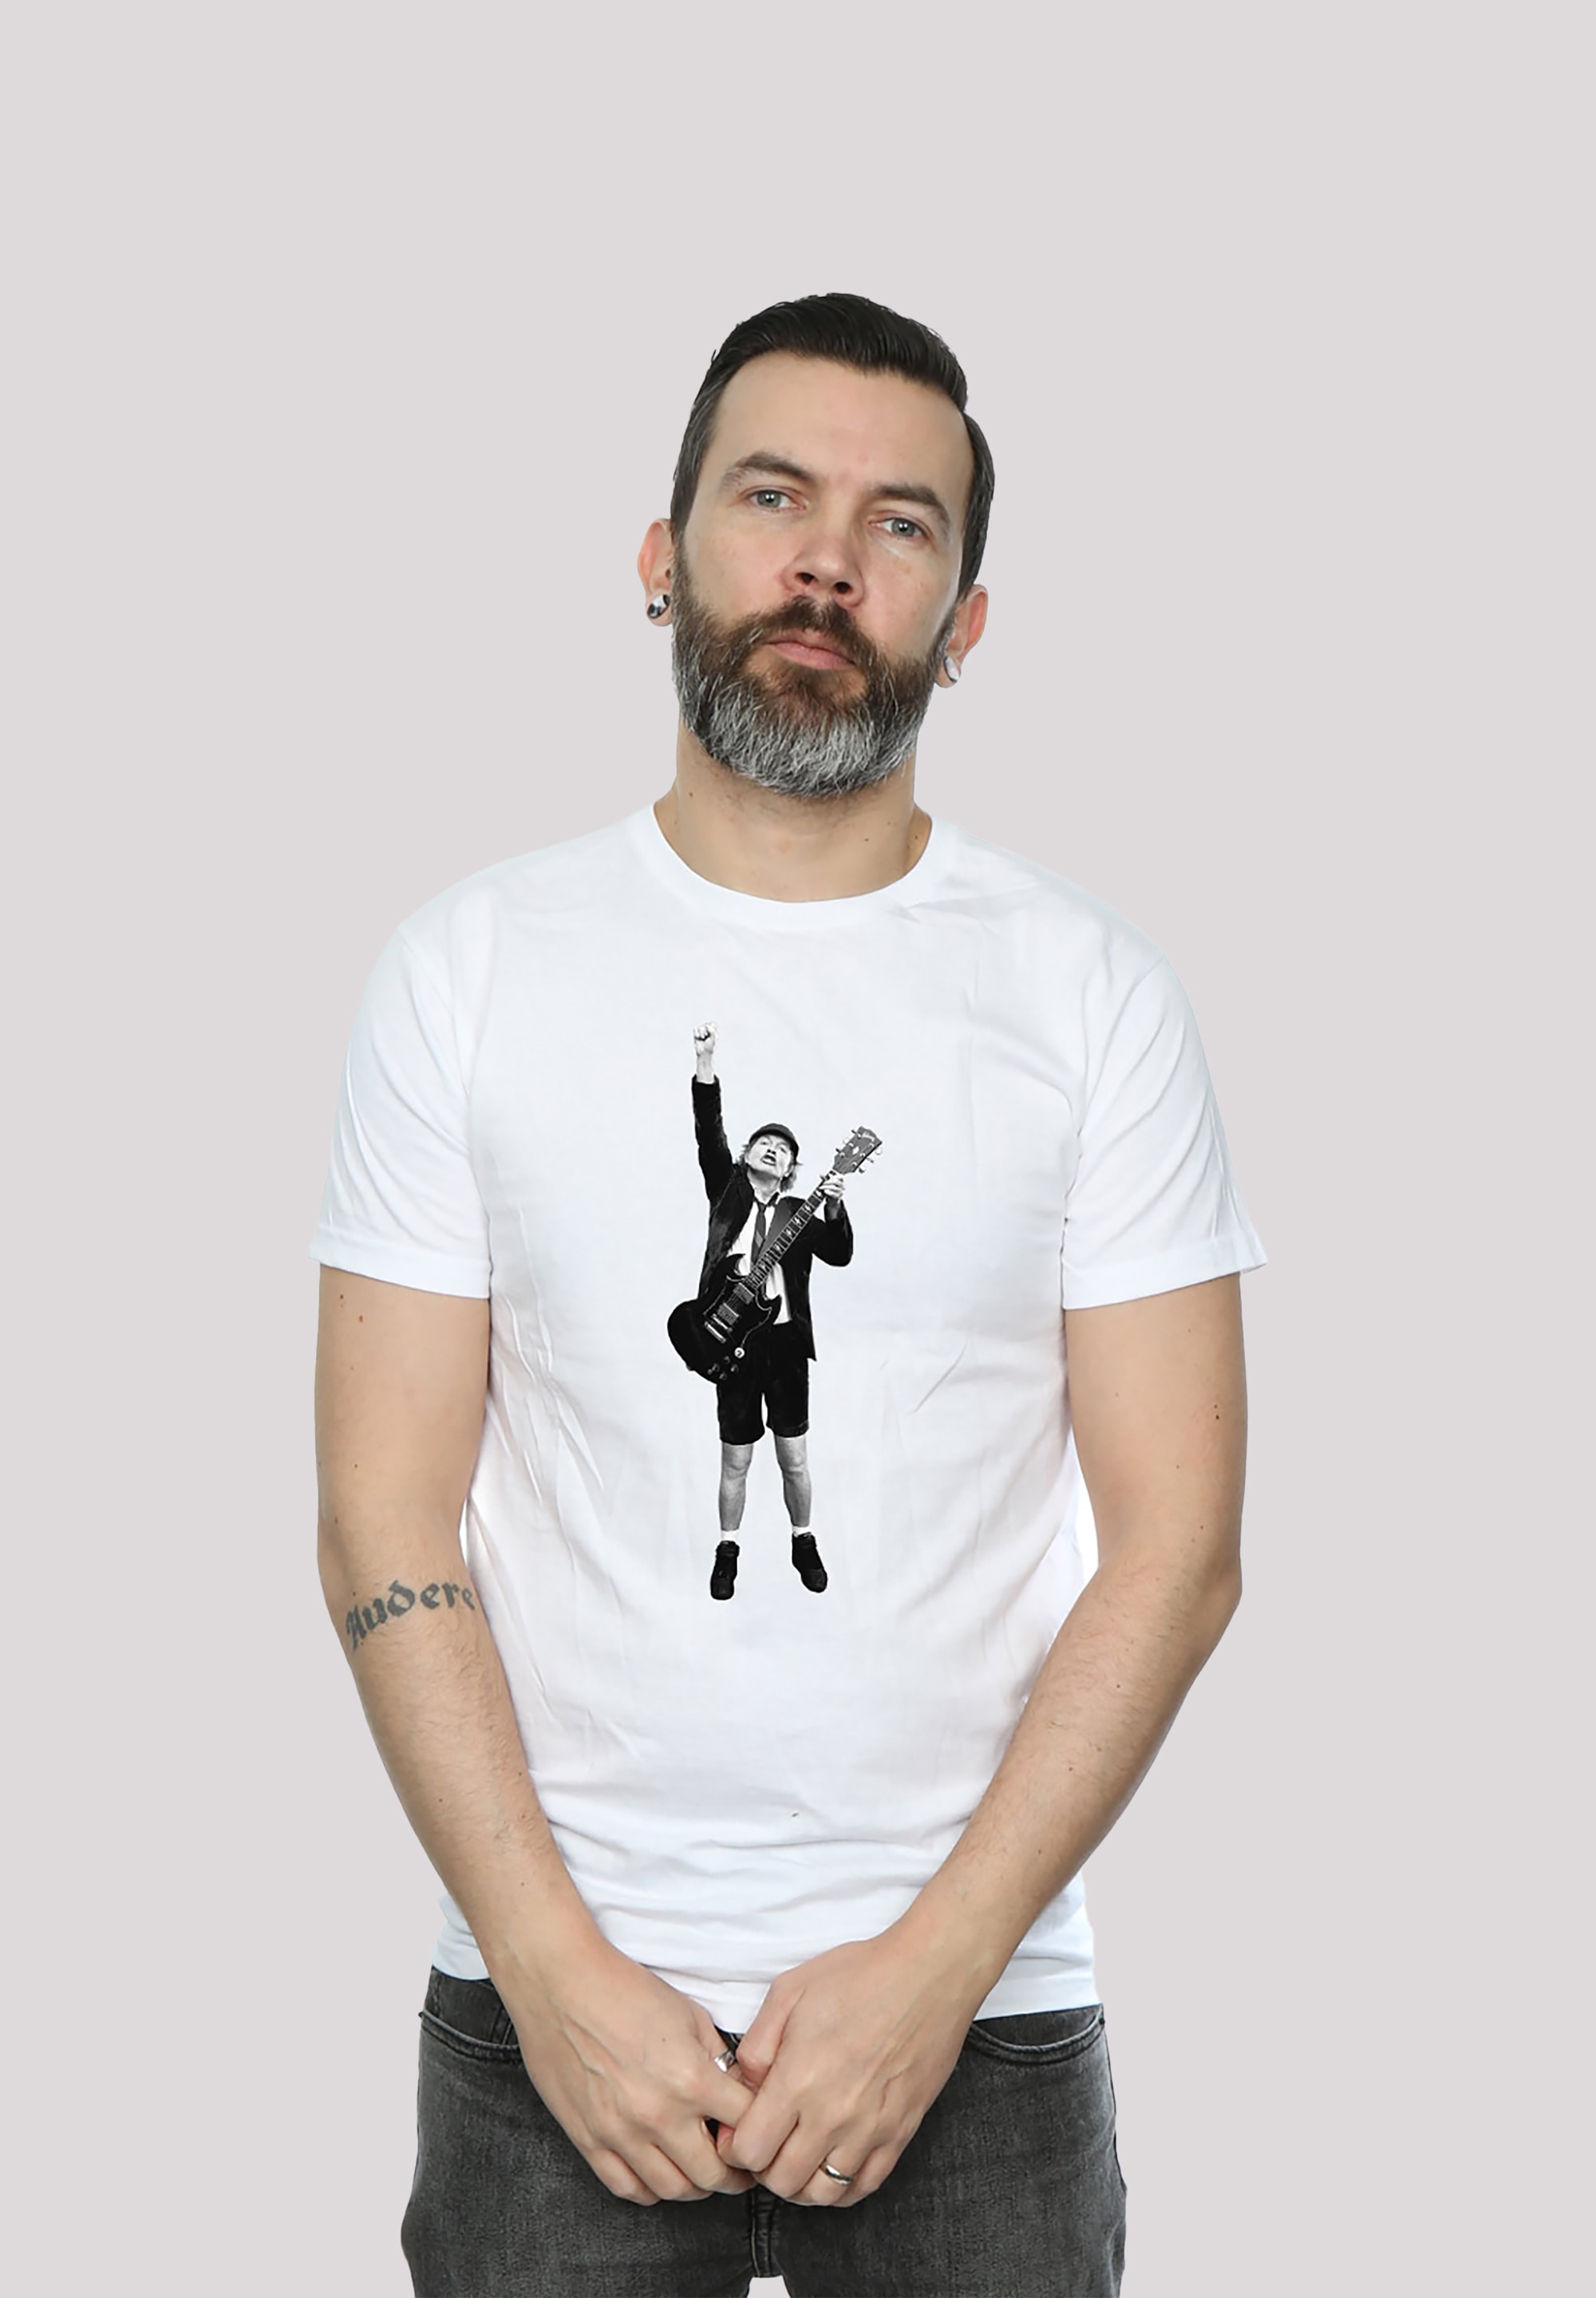 F4NT4STIC T-Shirt »ACDC Angus Young Cut Out für Kinder & Herren«, Print